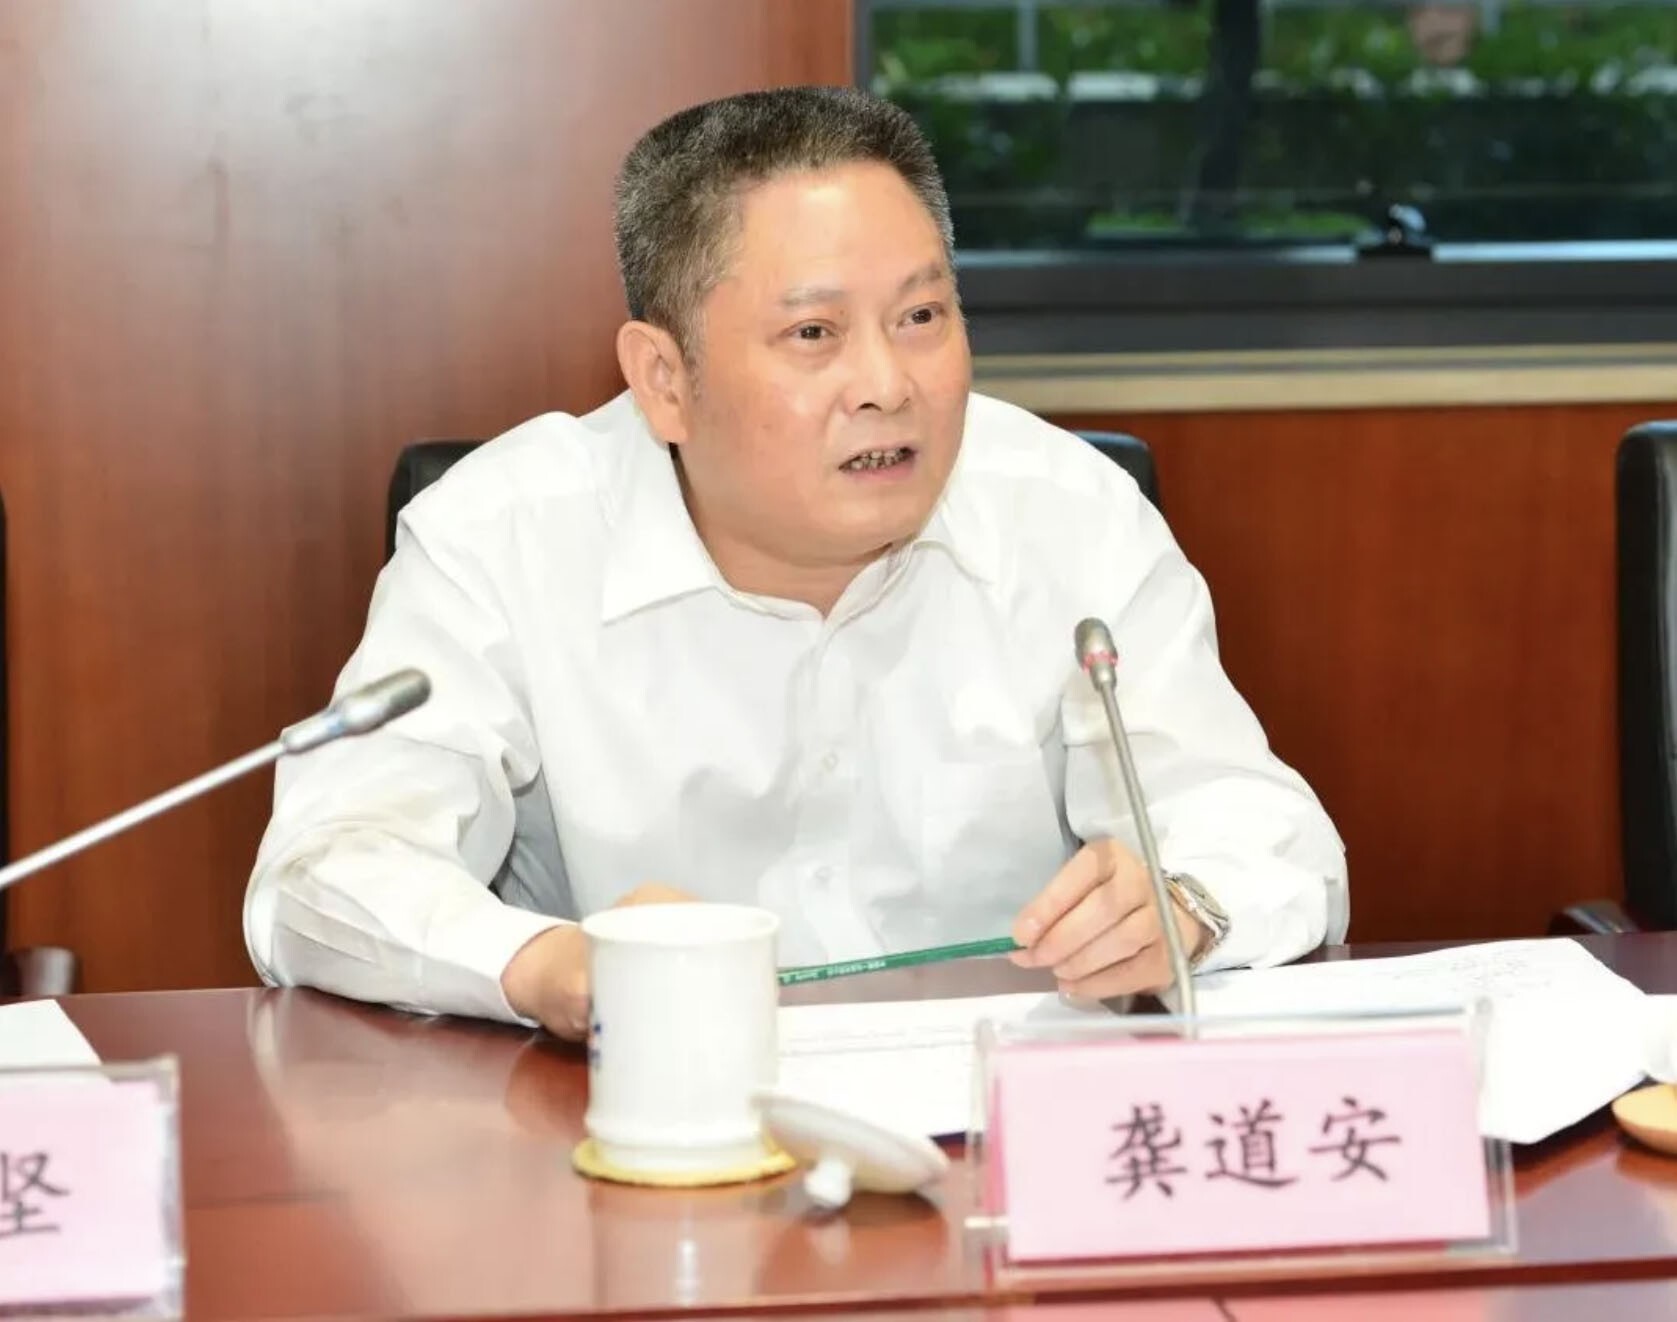 China’s Communist Party has expelled former Shanghai police chief Gong Daoan from its ranks. Photo: qq.com